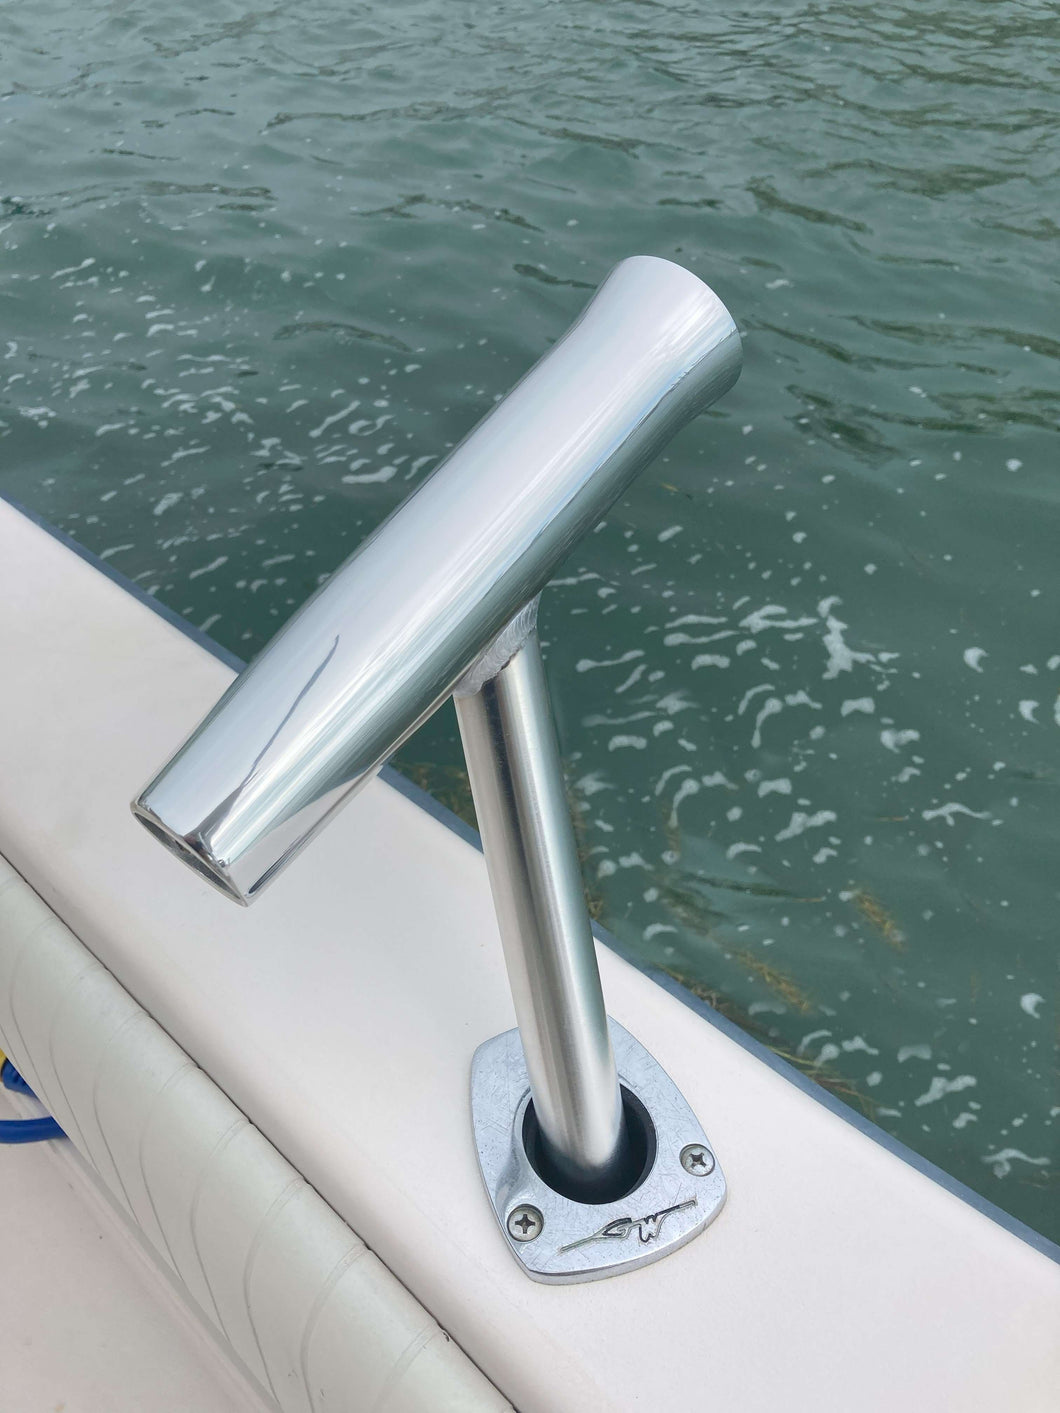 Salty Adventures 1-Way Fishing Rod Holder (Anodized Aluminum) - Outrigger Style - Rod Rigger